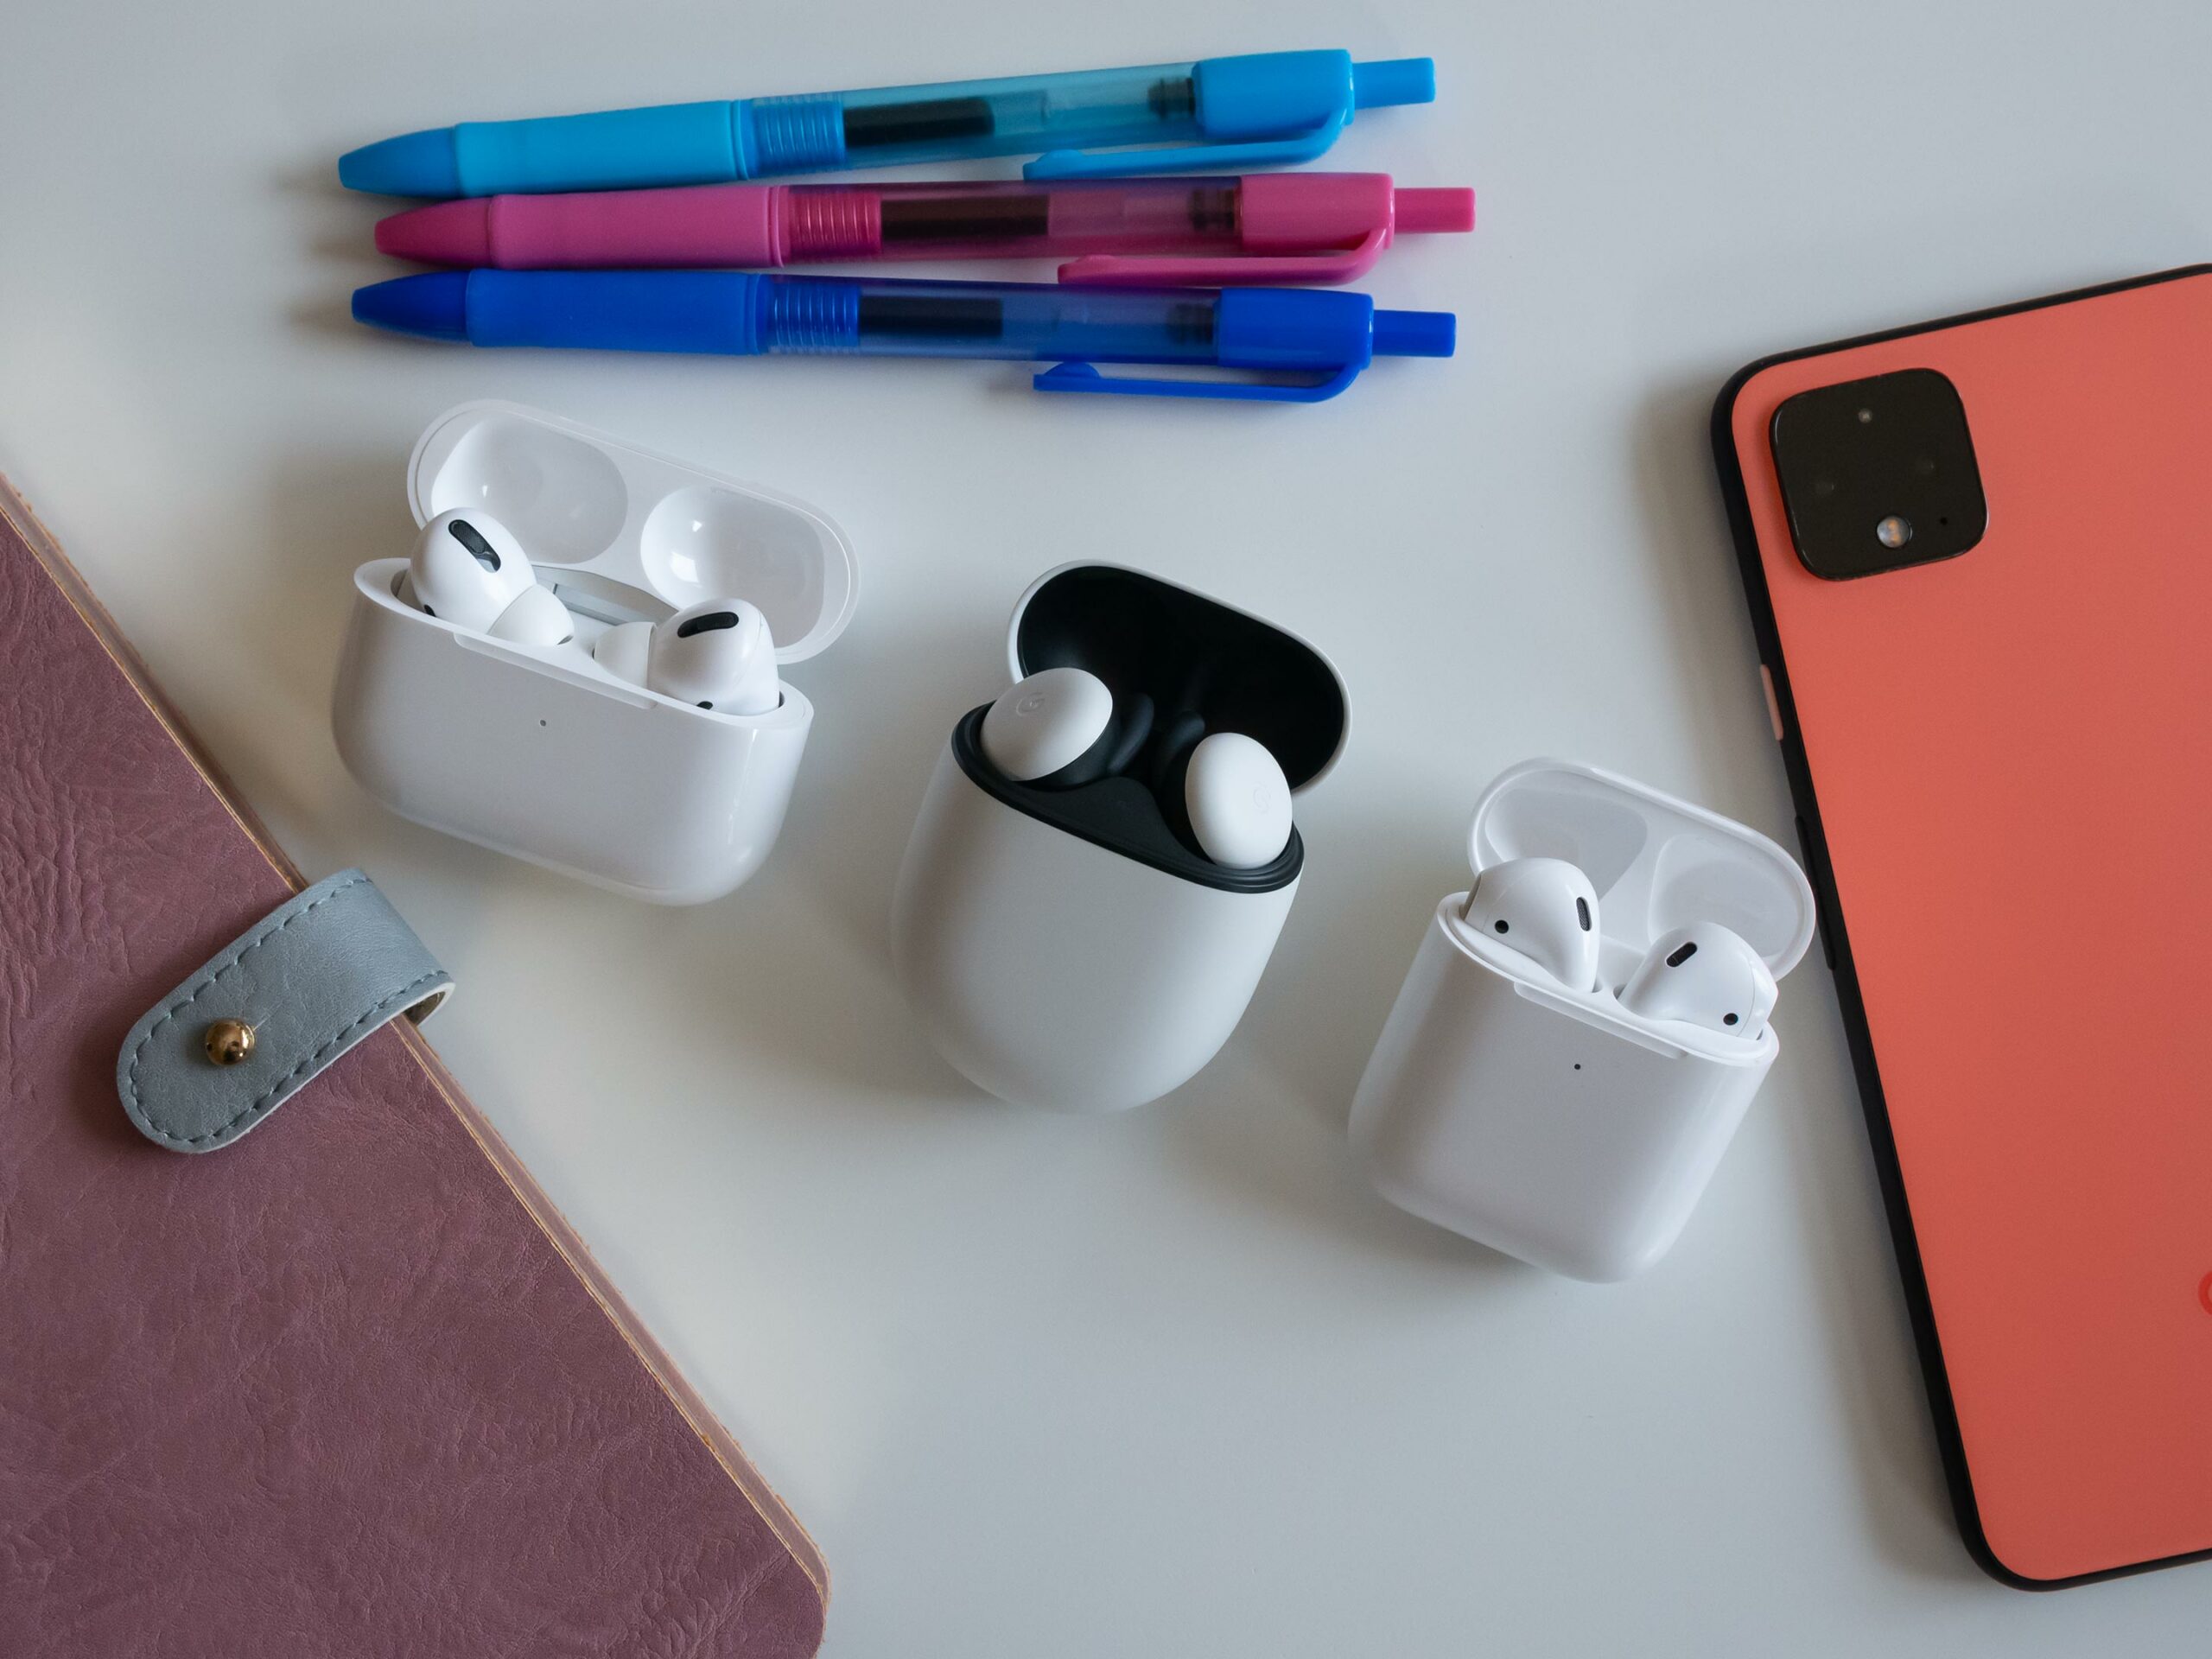 Pixel buds 2020 beside AirPods and AirPods Pro 